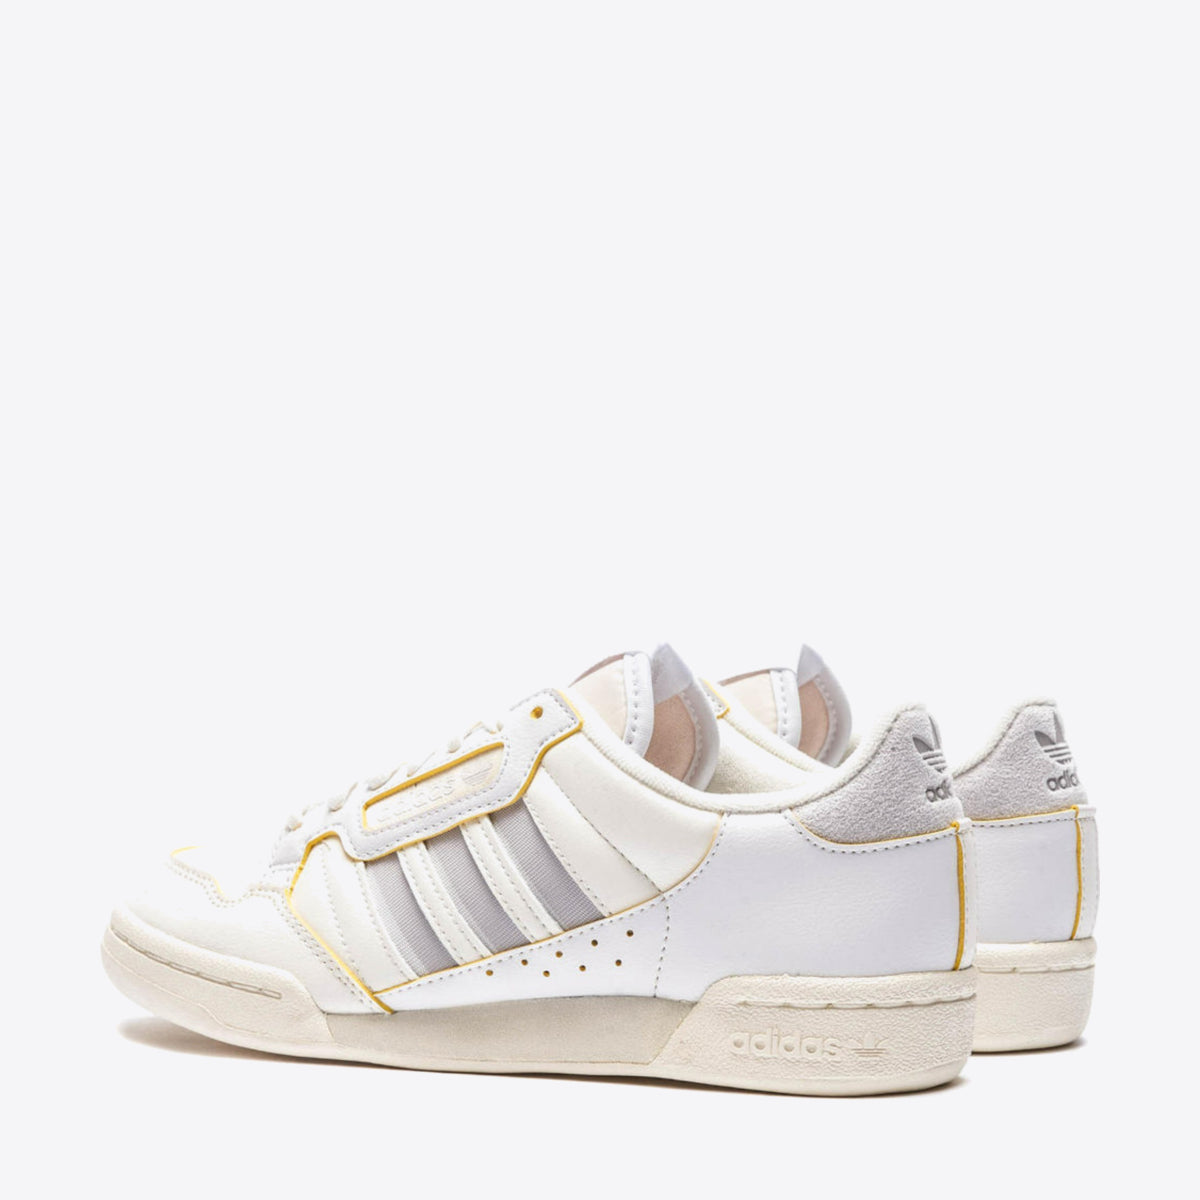  Continental 80 Stripes Cloud White/Grey/Off White